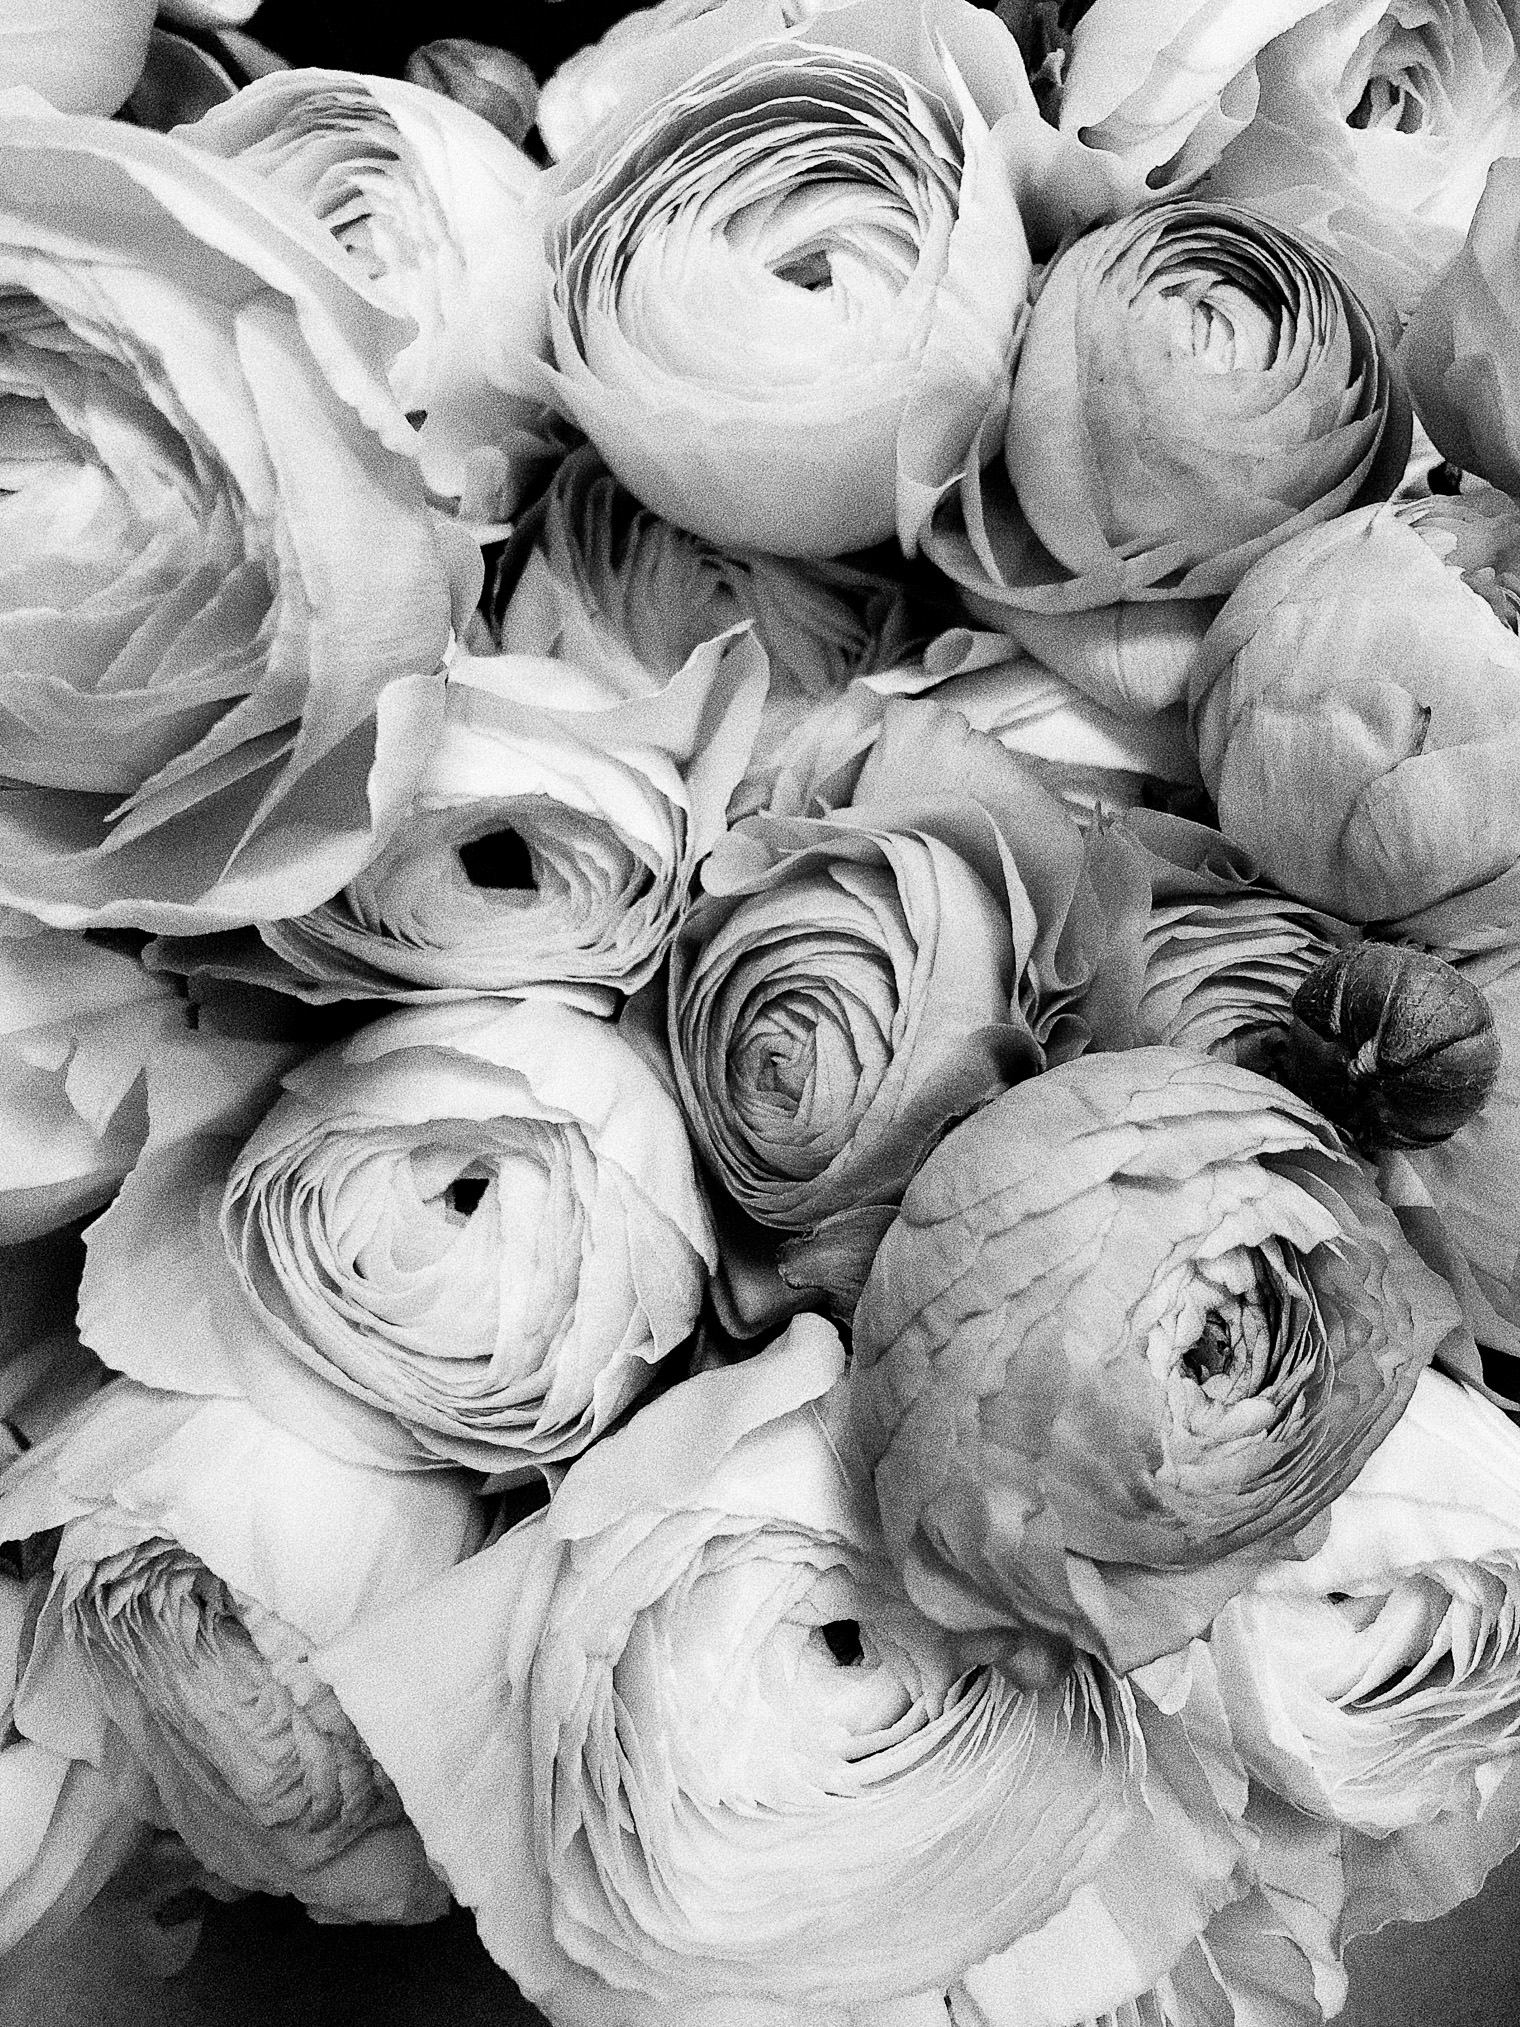 40 Stunning Black and White iPhone Wallpaper Backgrounds For Free |